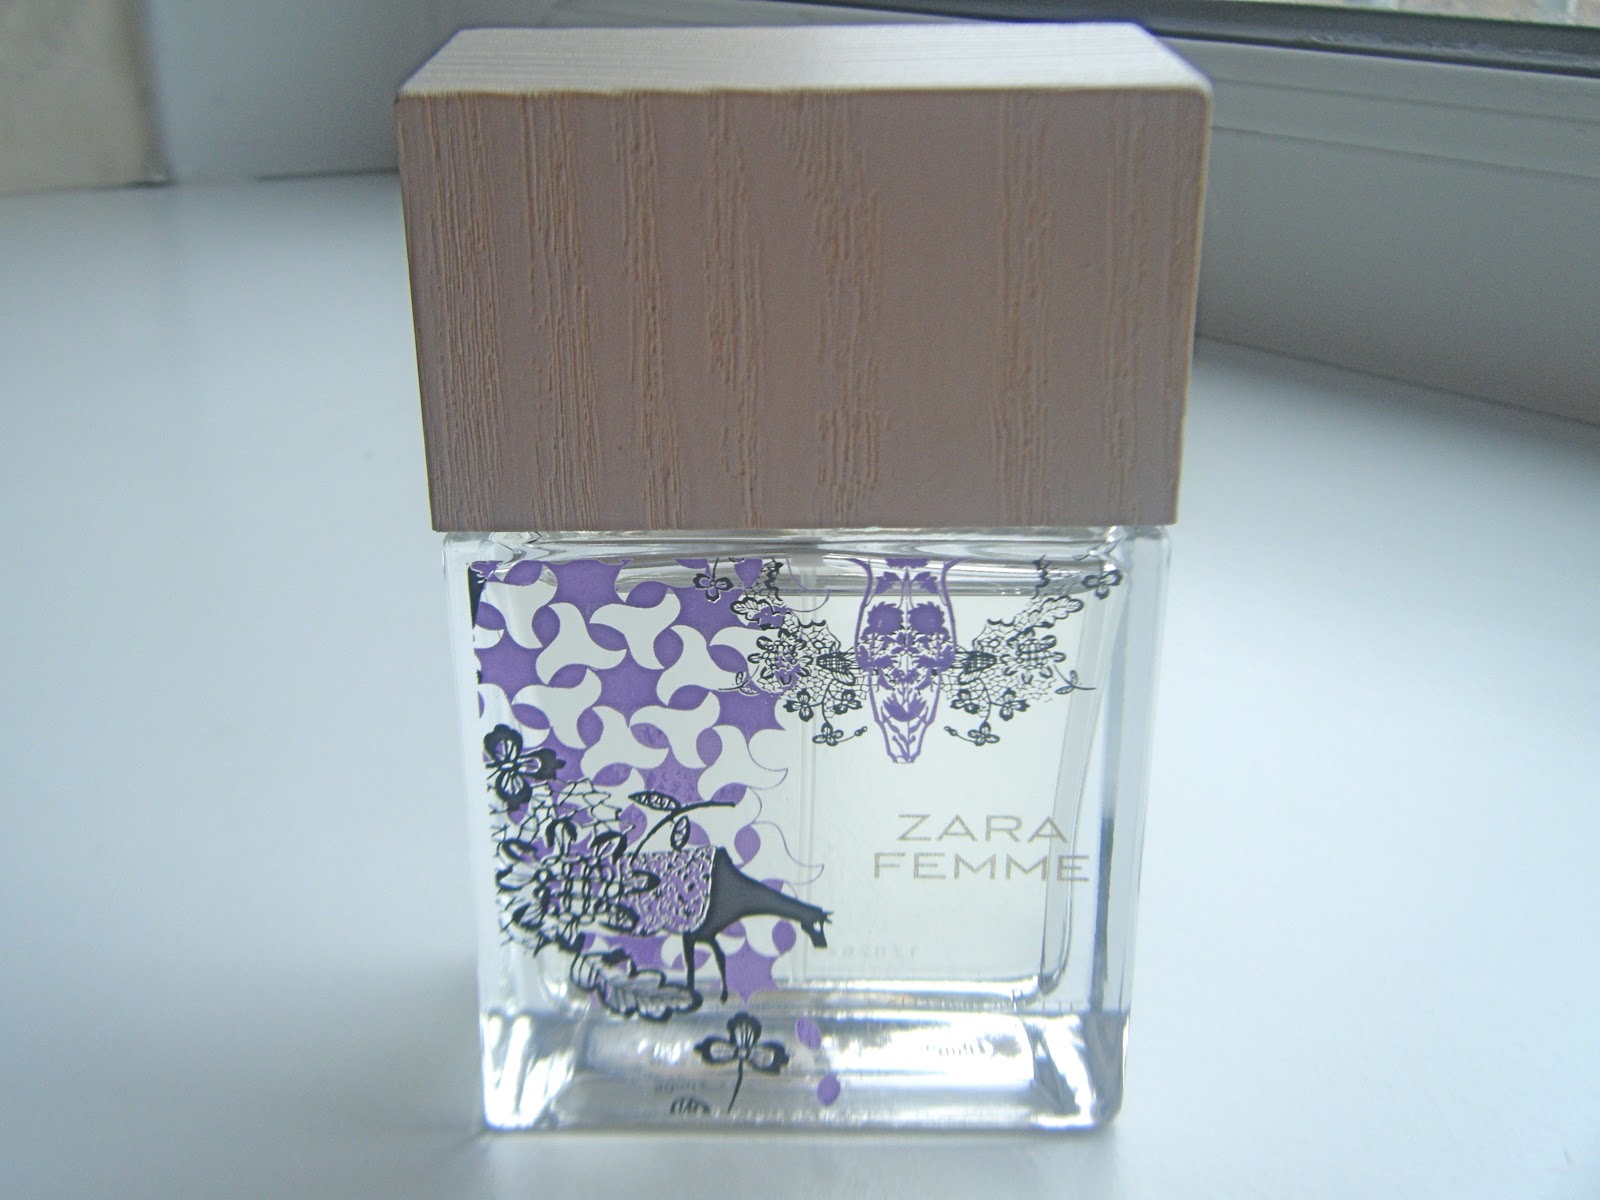 A Thing of Beauty | A Beauty, Fashion and Lifestyle Blog: Perfume on a